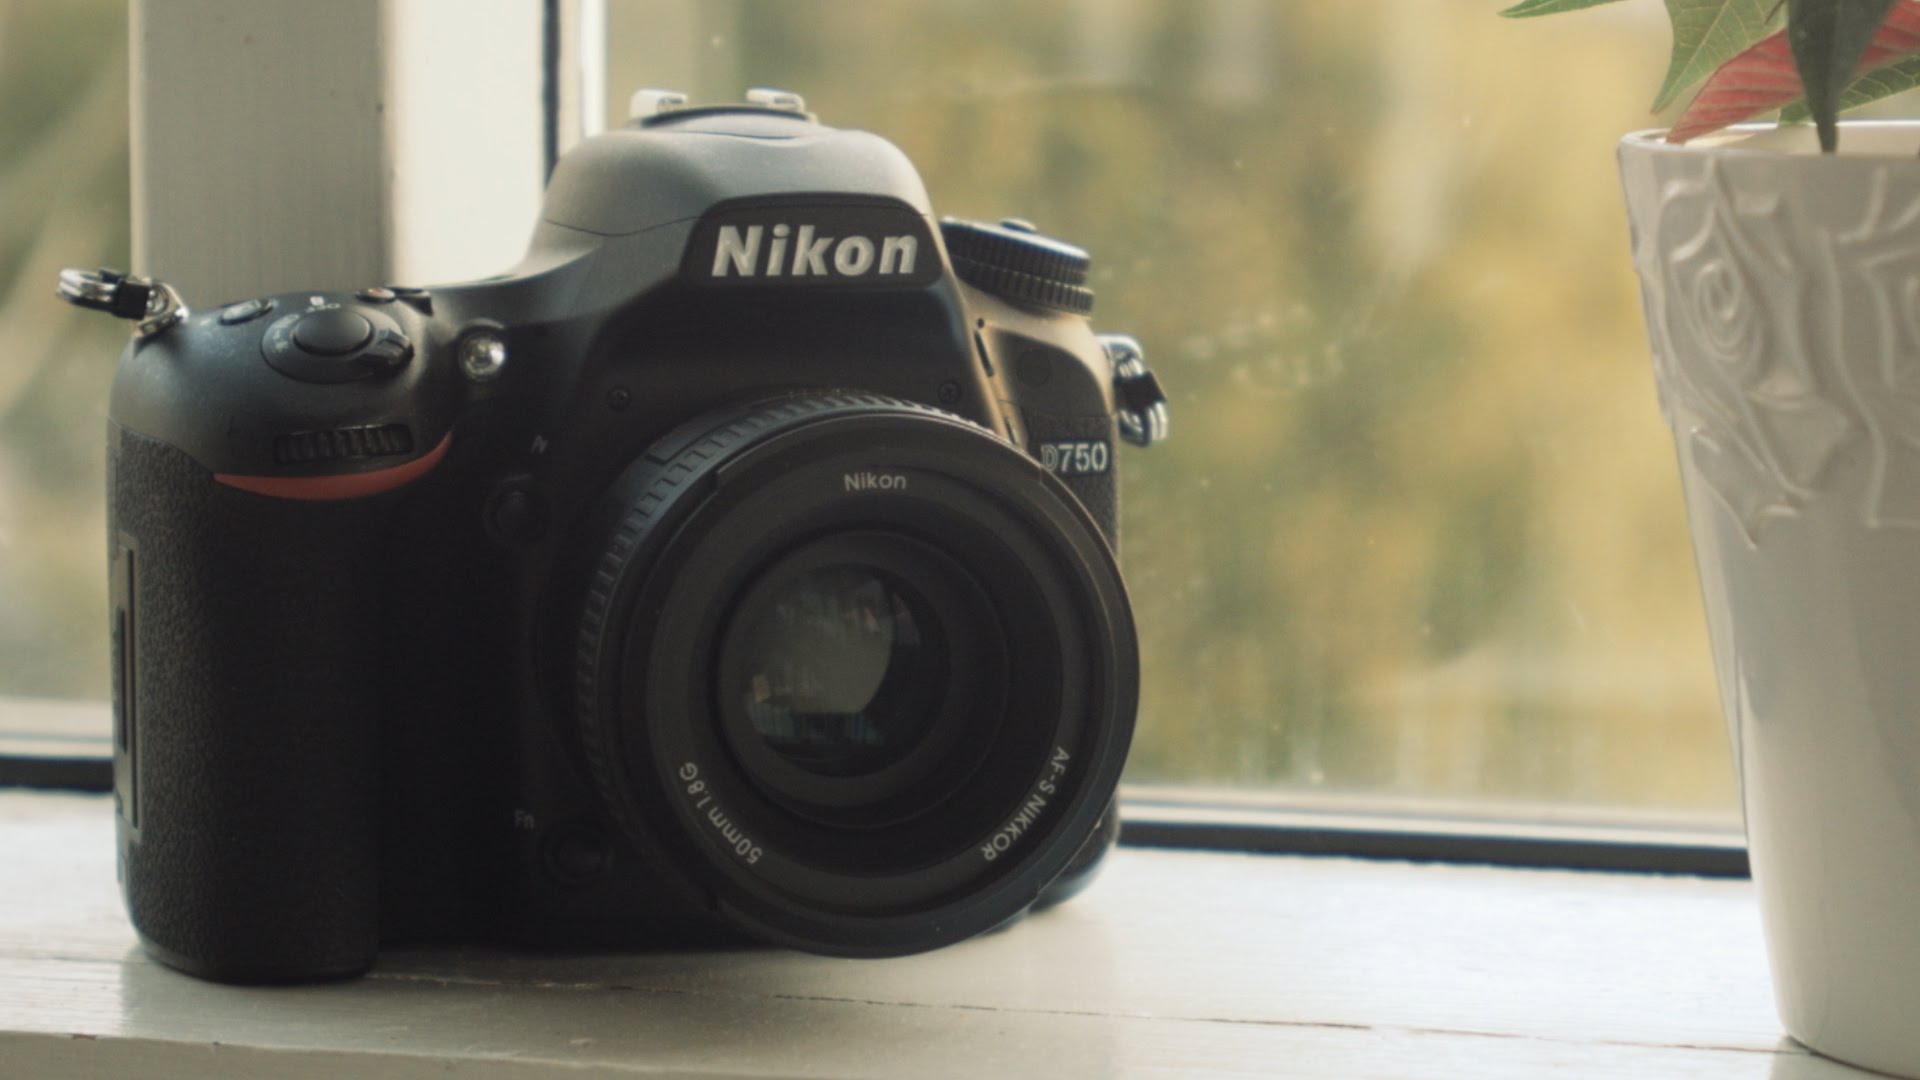 Nikon D750 Video Review – The best hybrid camera to date?